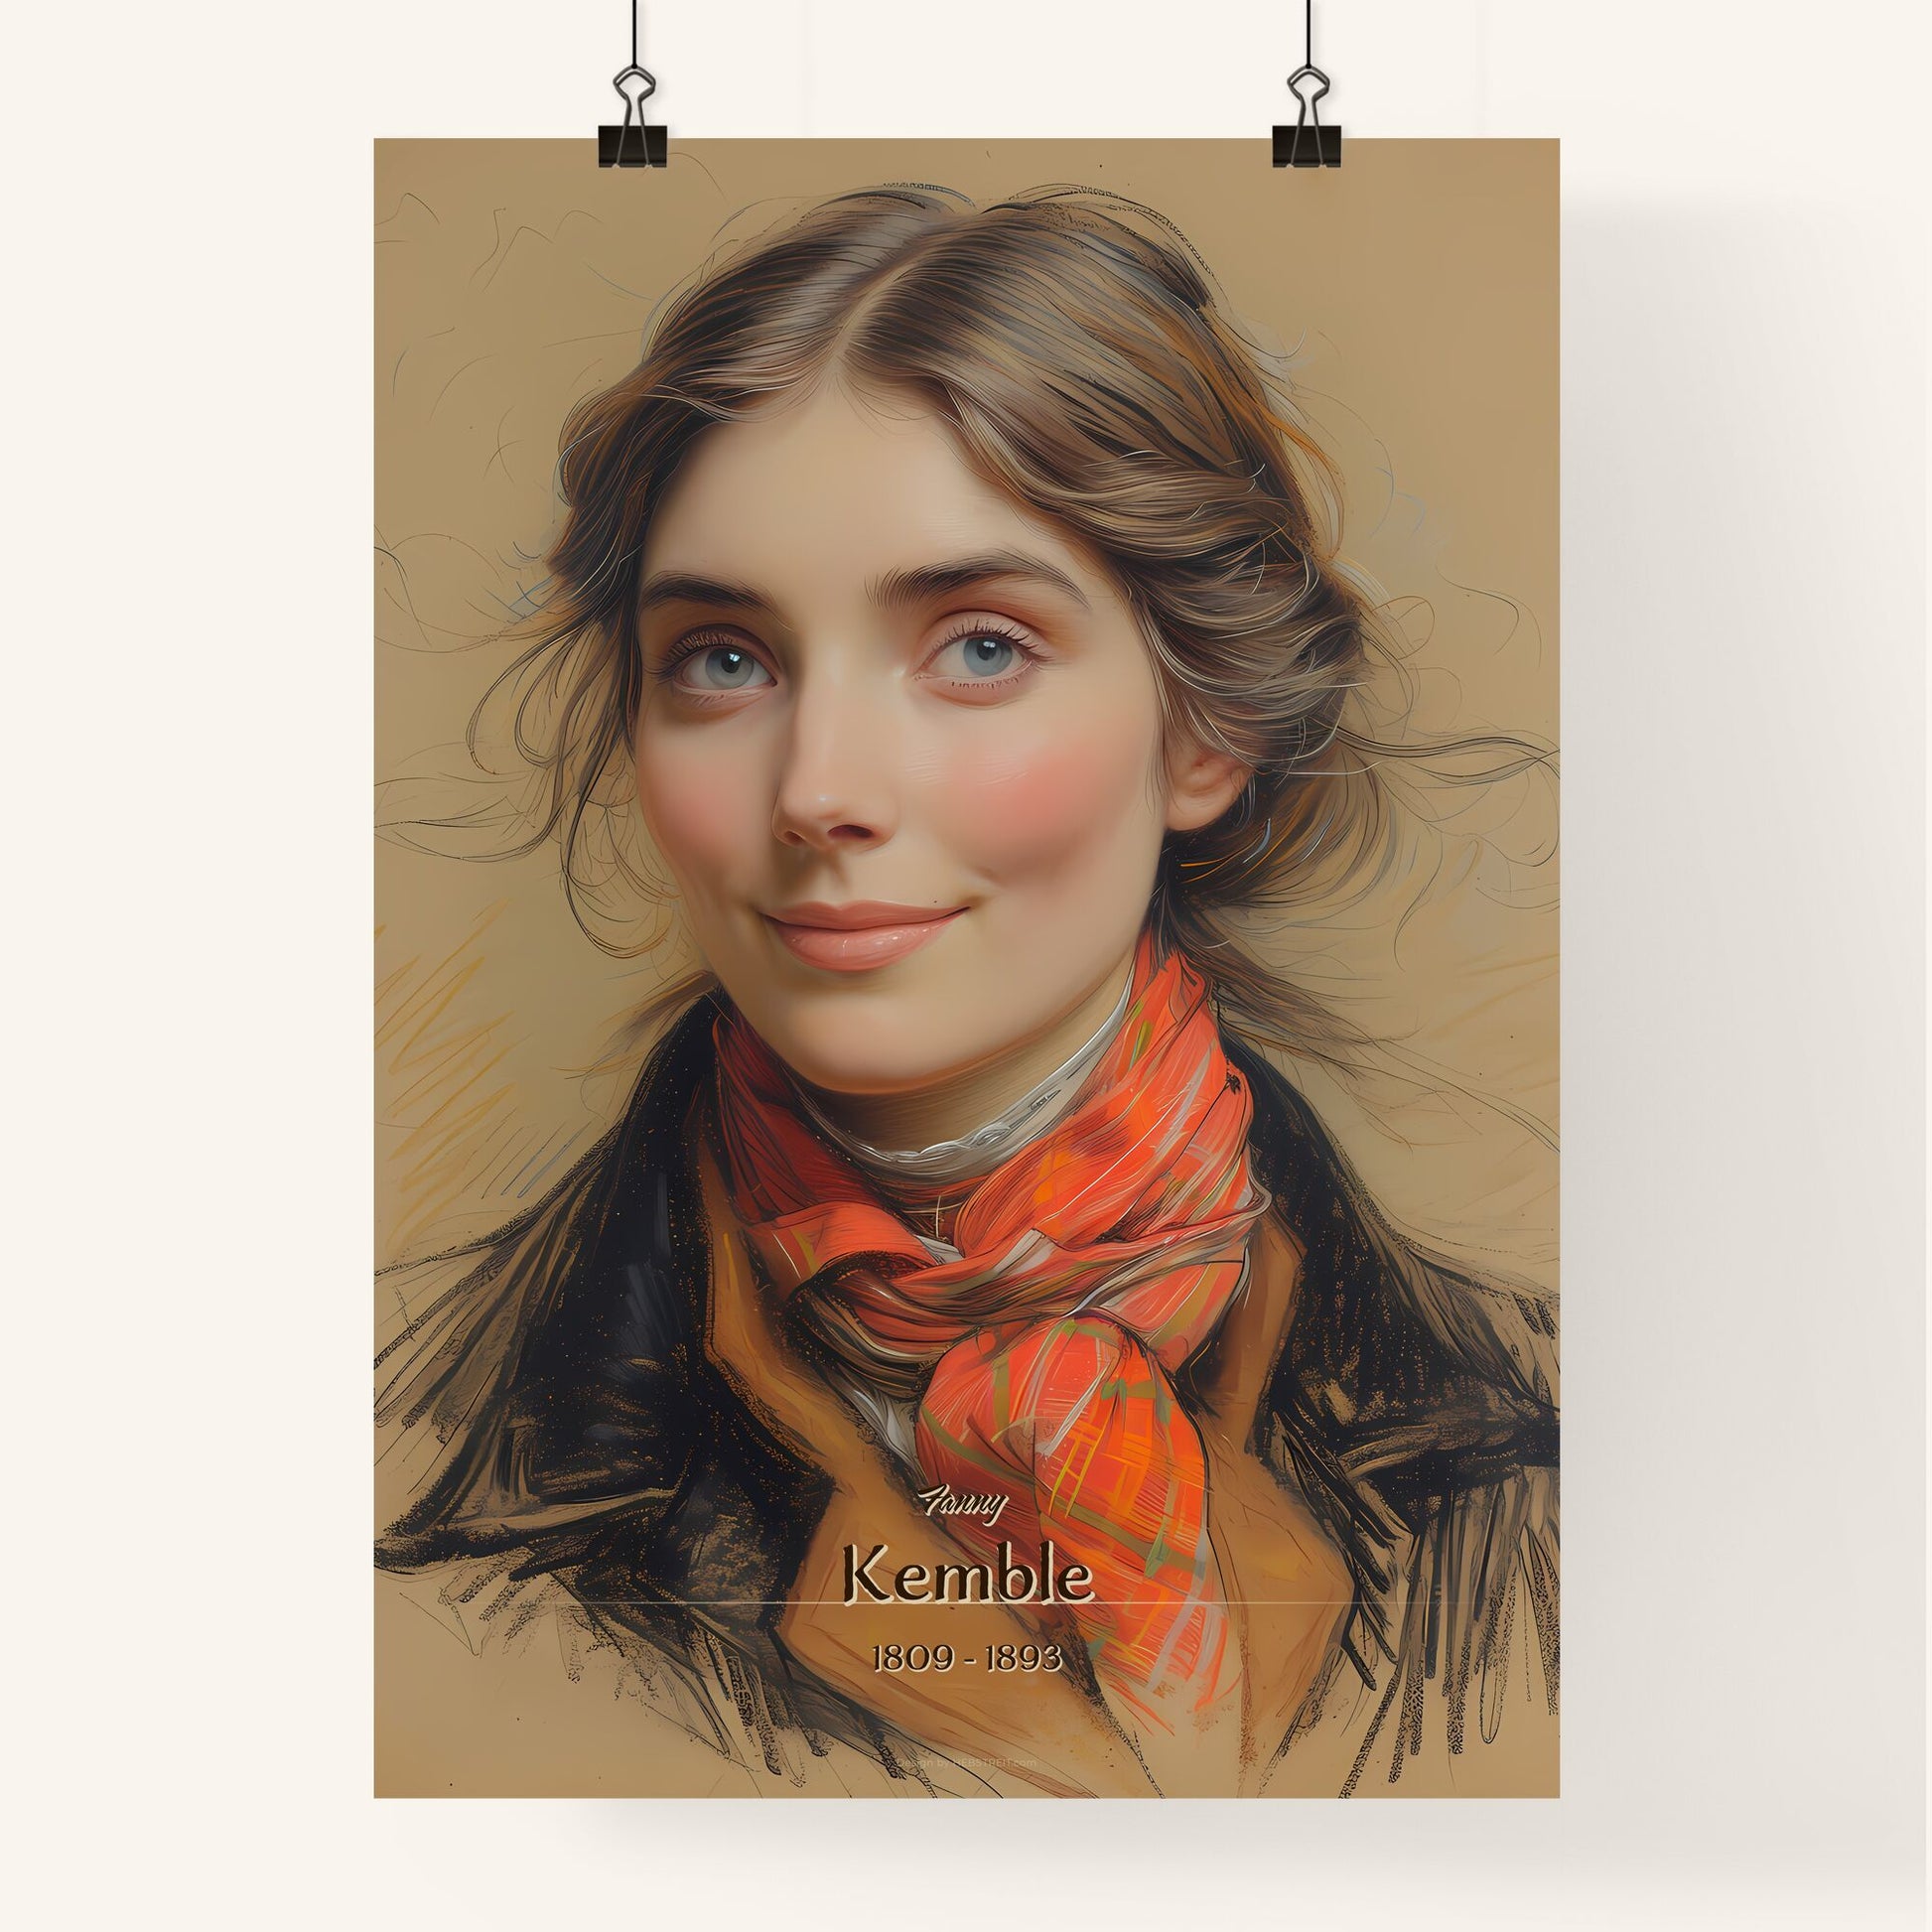 Fanny, Kemble, 1809 - 1893, A Poster of a woman with a scarf around her neck Default Title